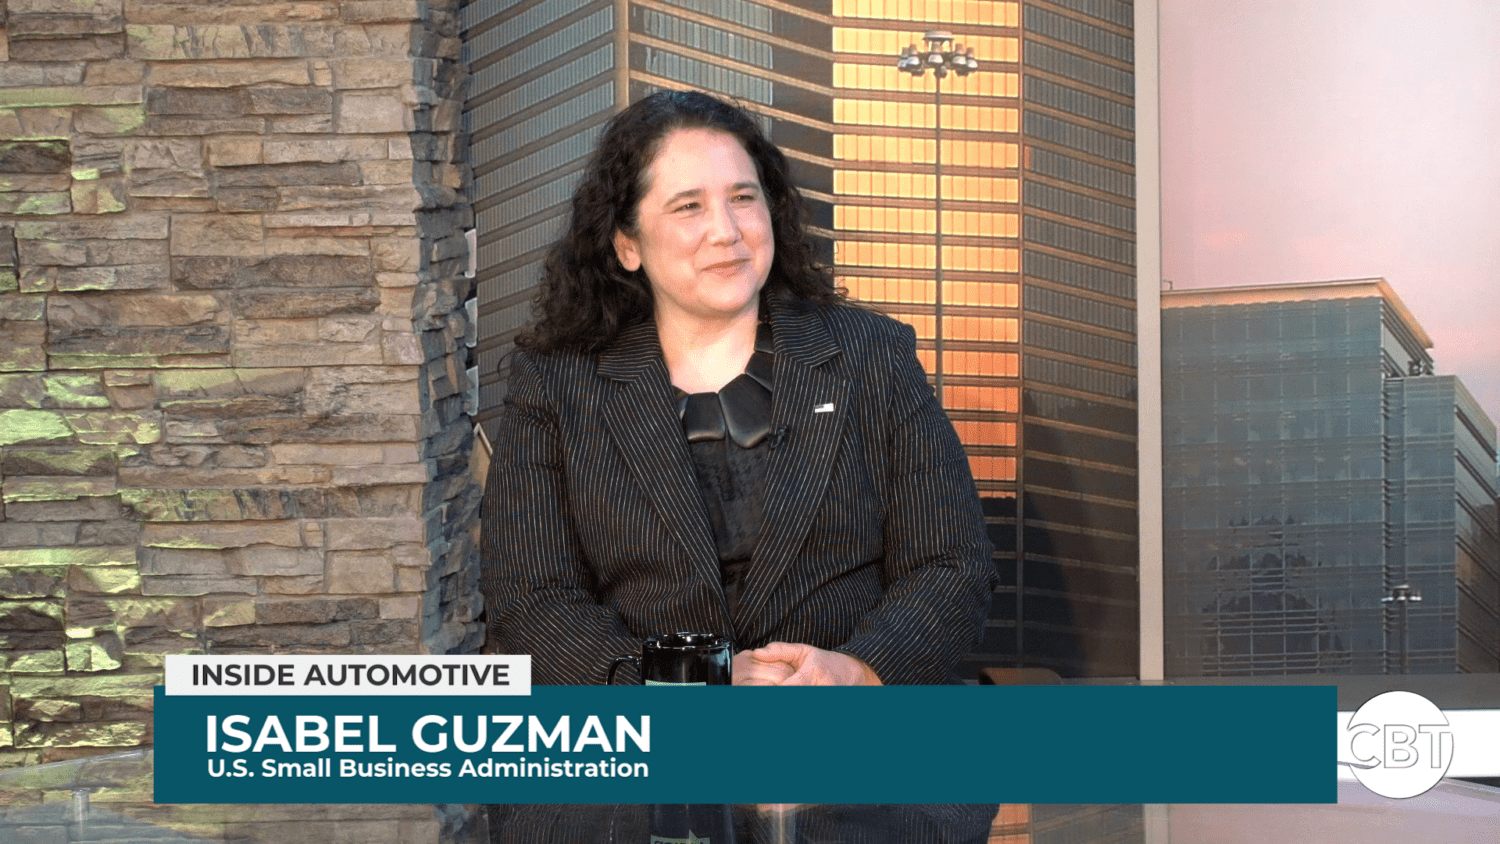 Isabella Casillas Guzman joins Inside Automotive to discuss the critical role the SBA plays in creating opportunities for entrepreneurs.